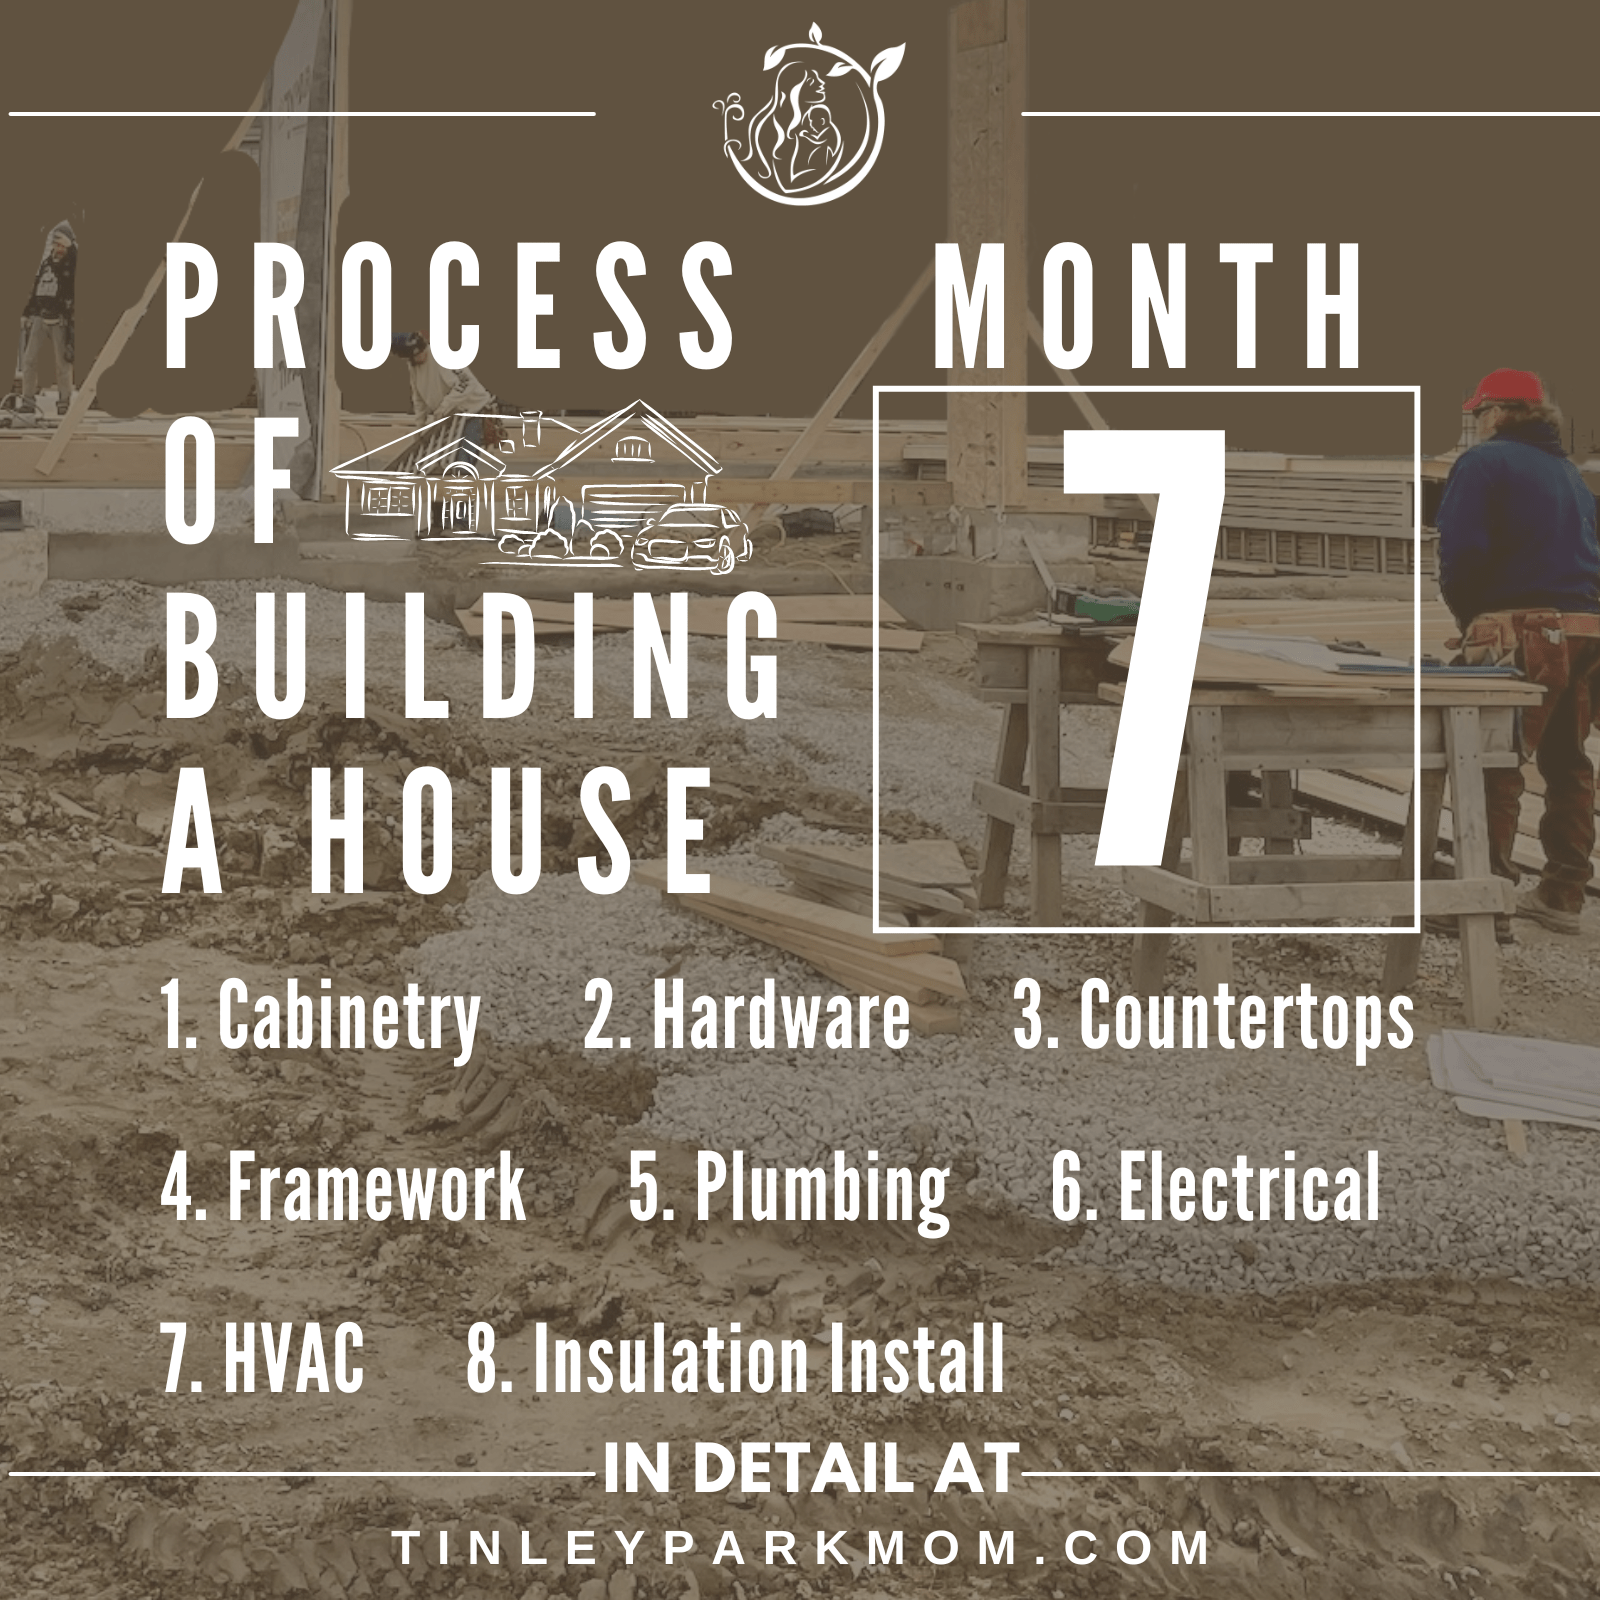 PROCESS OF BUILDING A HOUSE
1. Cabinetry
2. Hardware
3. Countertops
4. Rough Framework
5. Rough Plumbing
6. Rough Electrical
7. Rough HVAC
8. Insulation Install